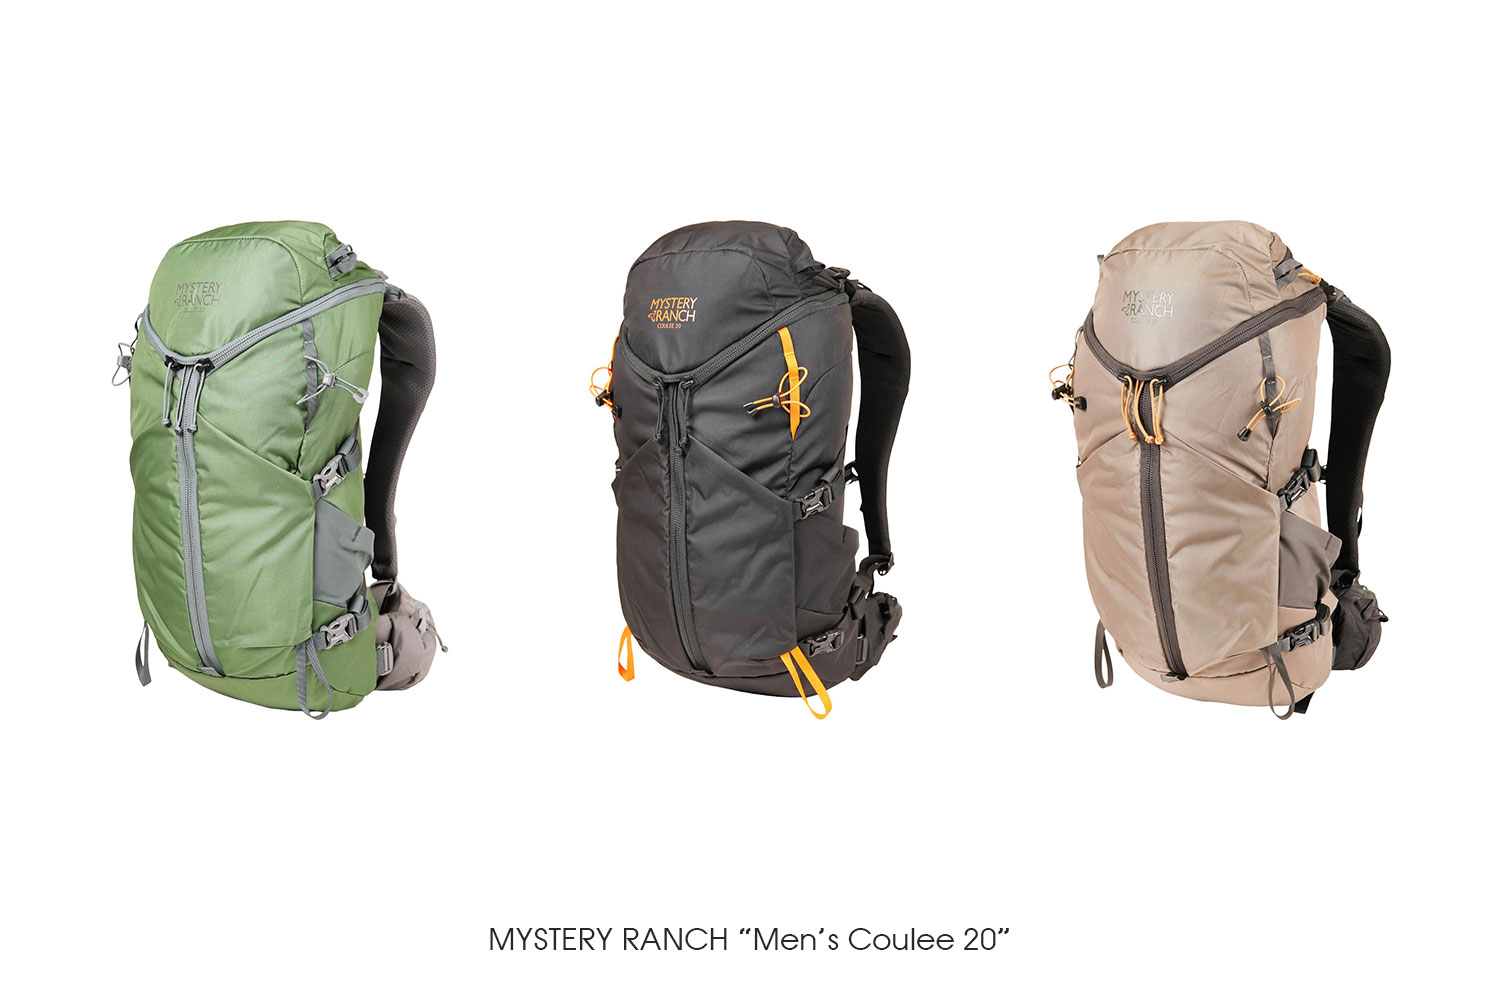 MYSTERY RANCH "Men's Coulee 20"